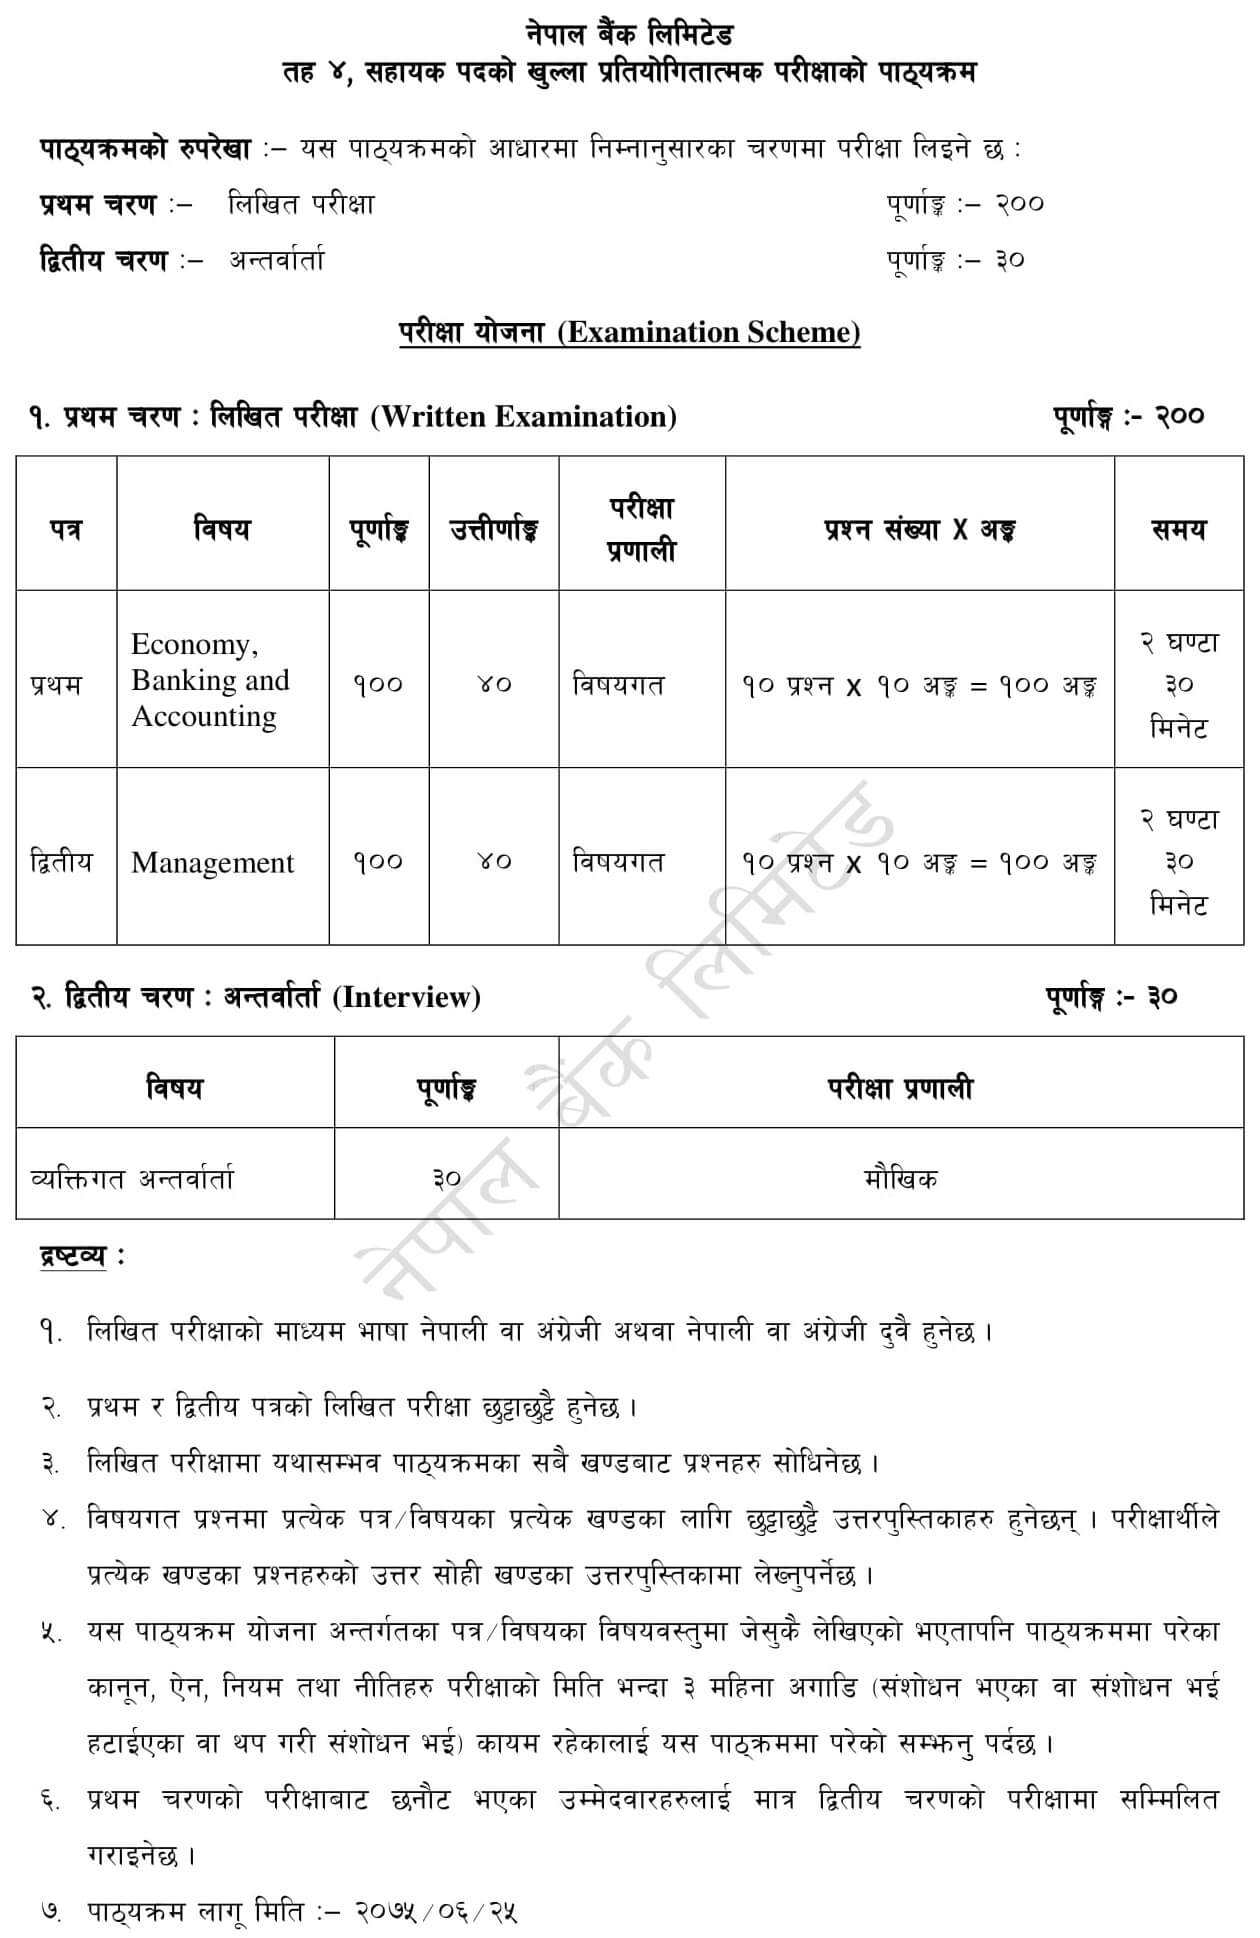 Nepal Bank Limited - NBL Exam Syllabus Department: Administration Rank: Level 4 Assistant